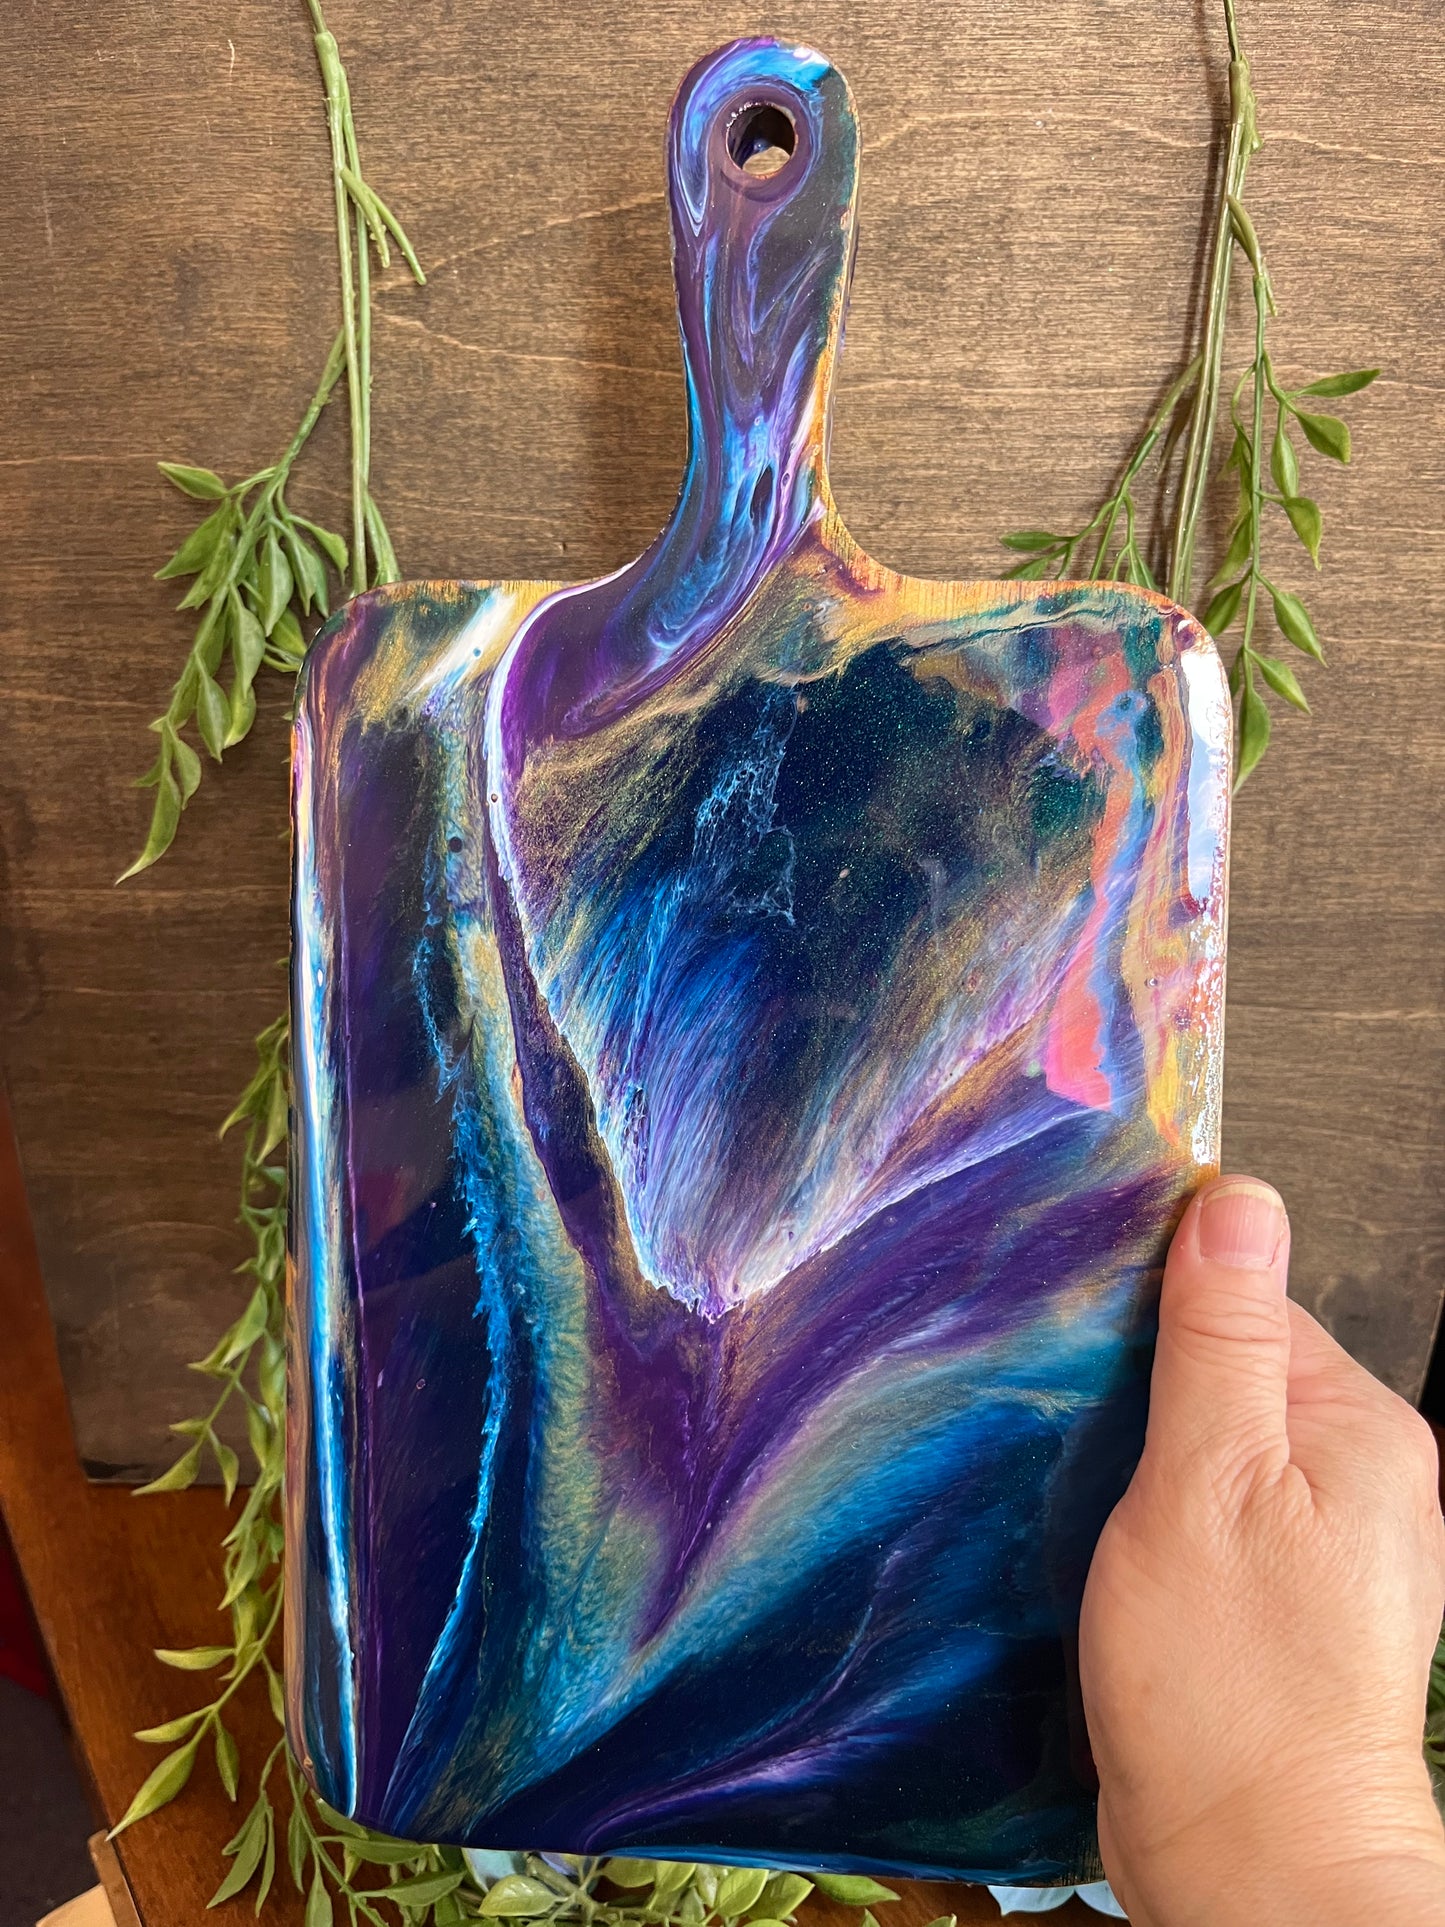 Resin Class - Personal size Cutting board - 7/29 @ 1pm